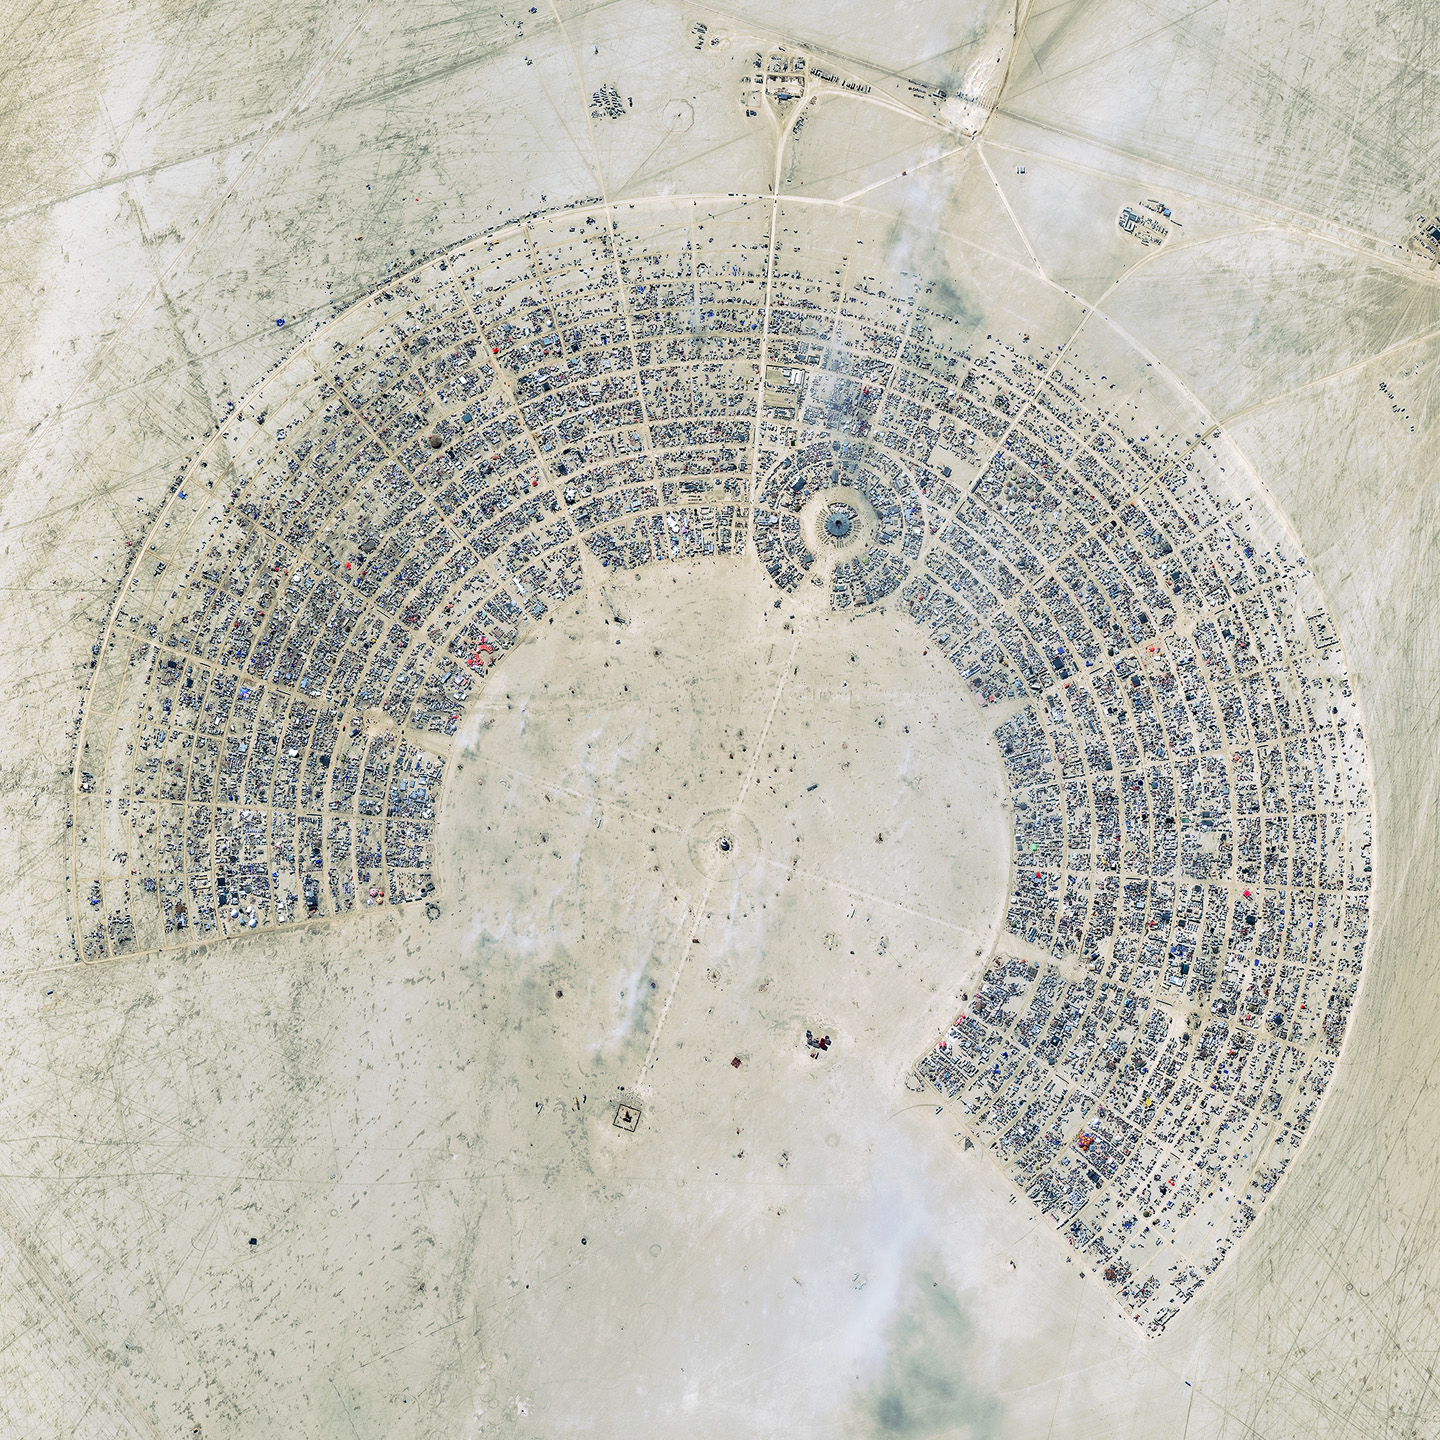 A satellite image of the Burning Man festival in Nevada, which is organized as concentric arcs with avenues emanating from the center.